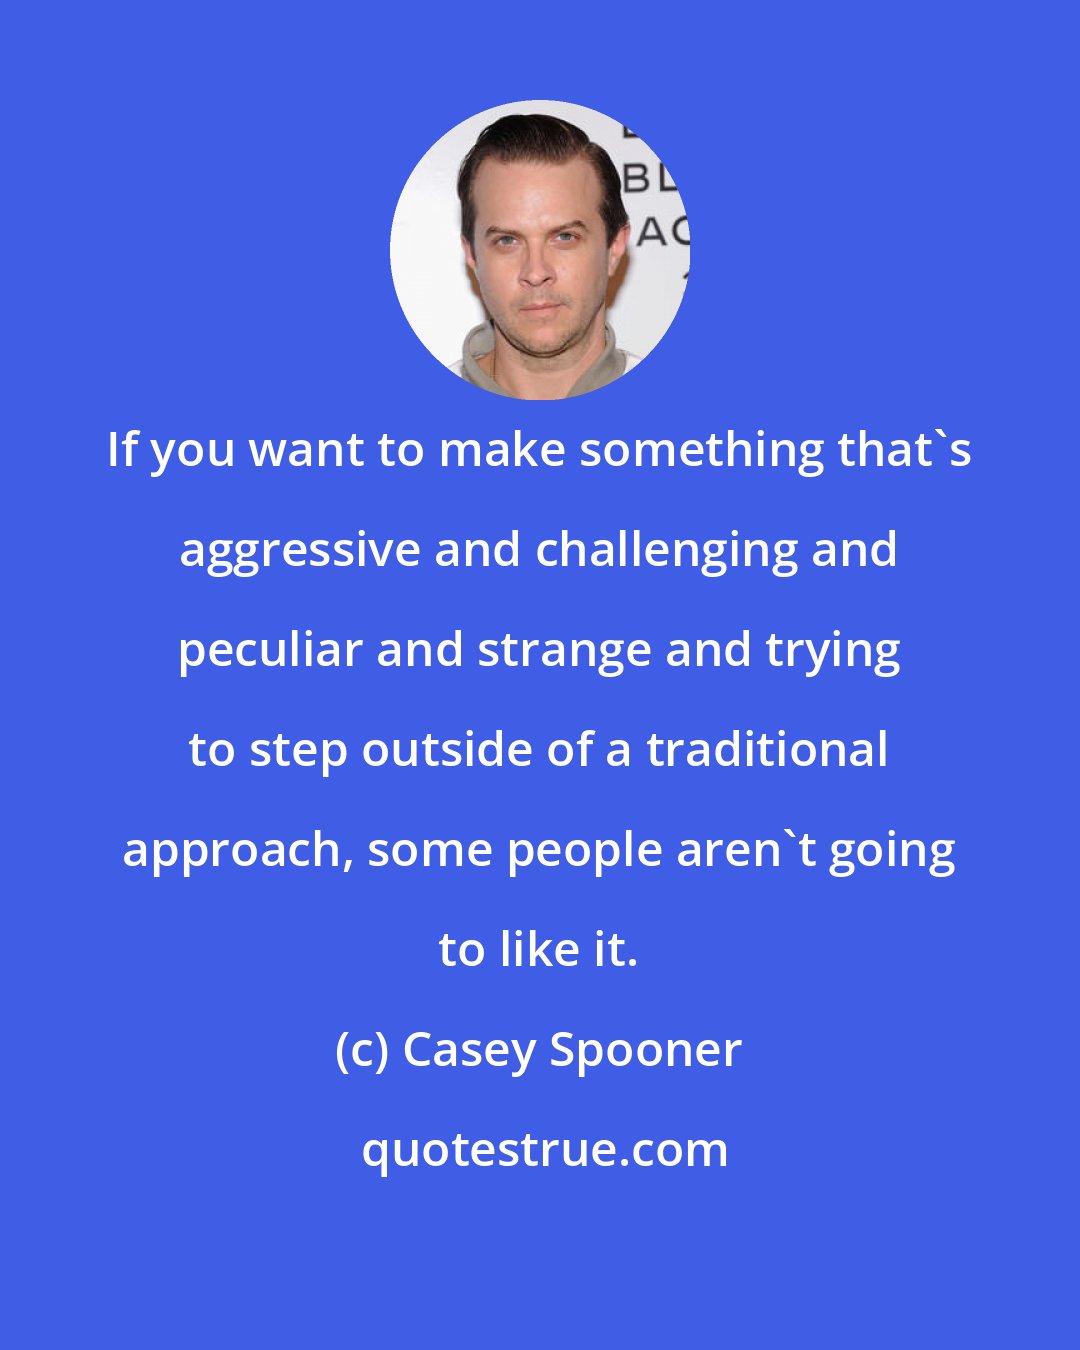 Casey Spooner: If you want to make something that's aggressive and challenging and peculiar and strange and trying to step outside of a traditional approach, some people aren't going to like it.